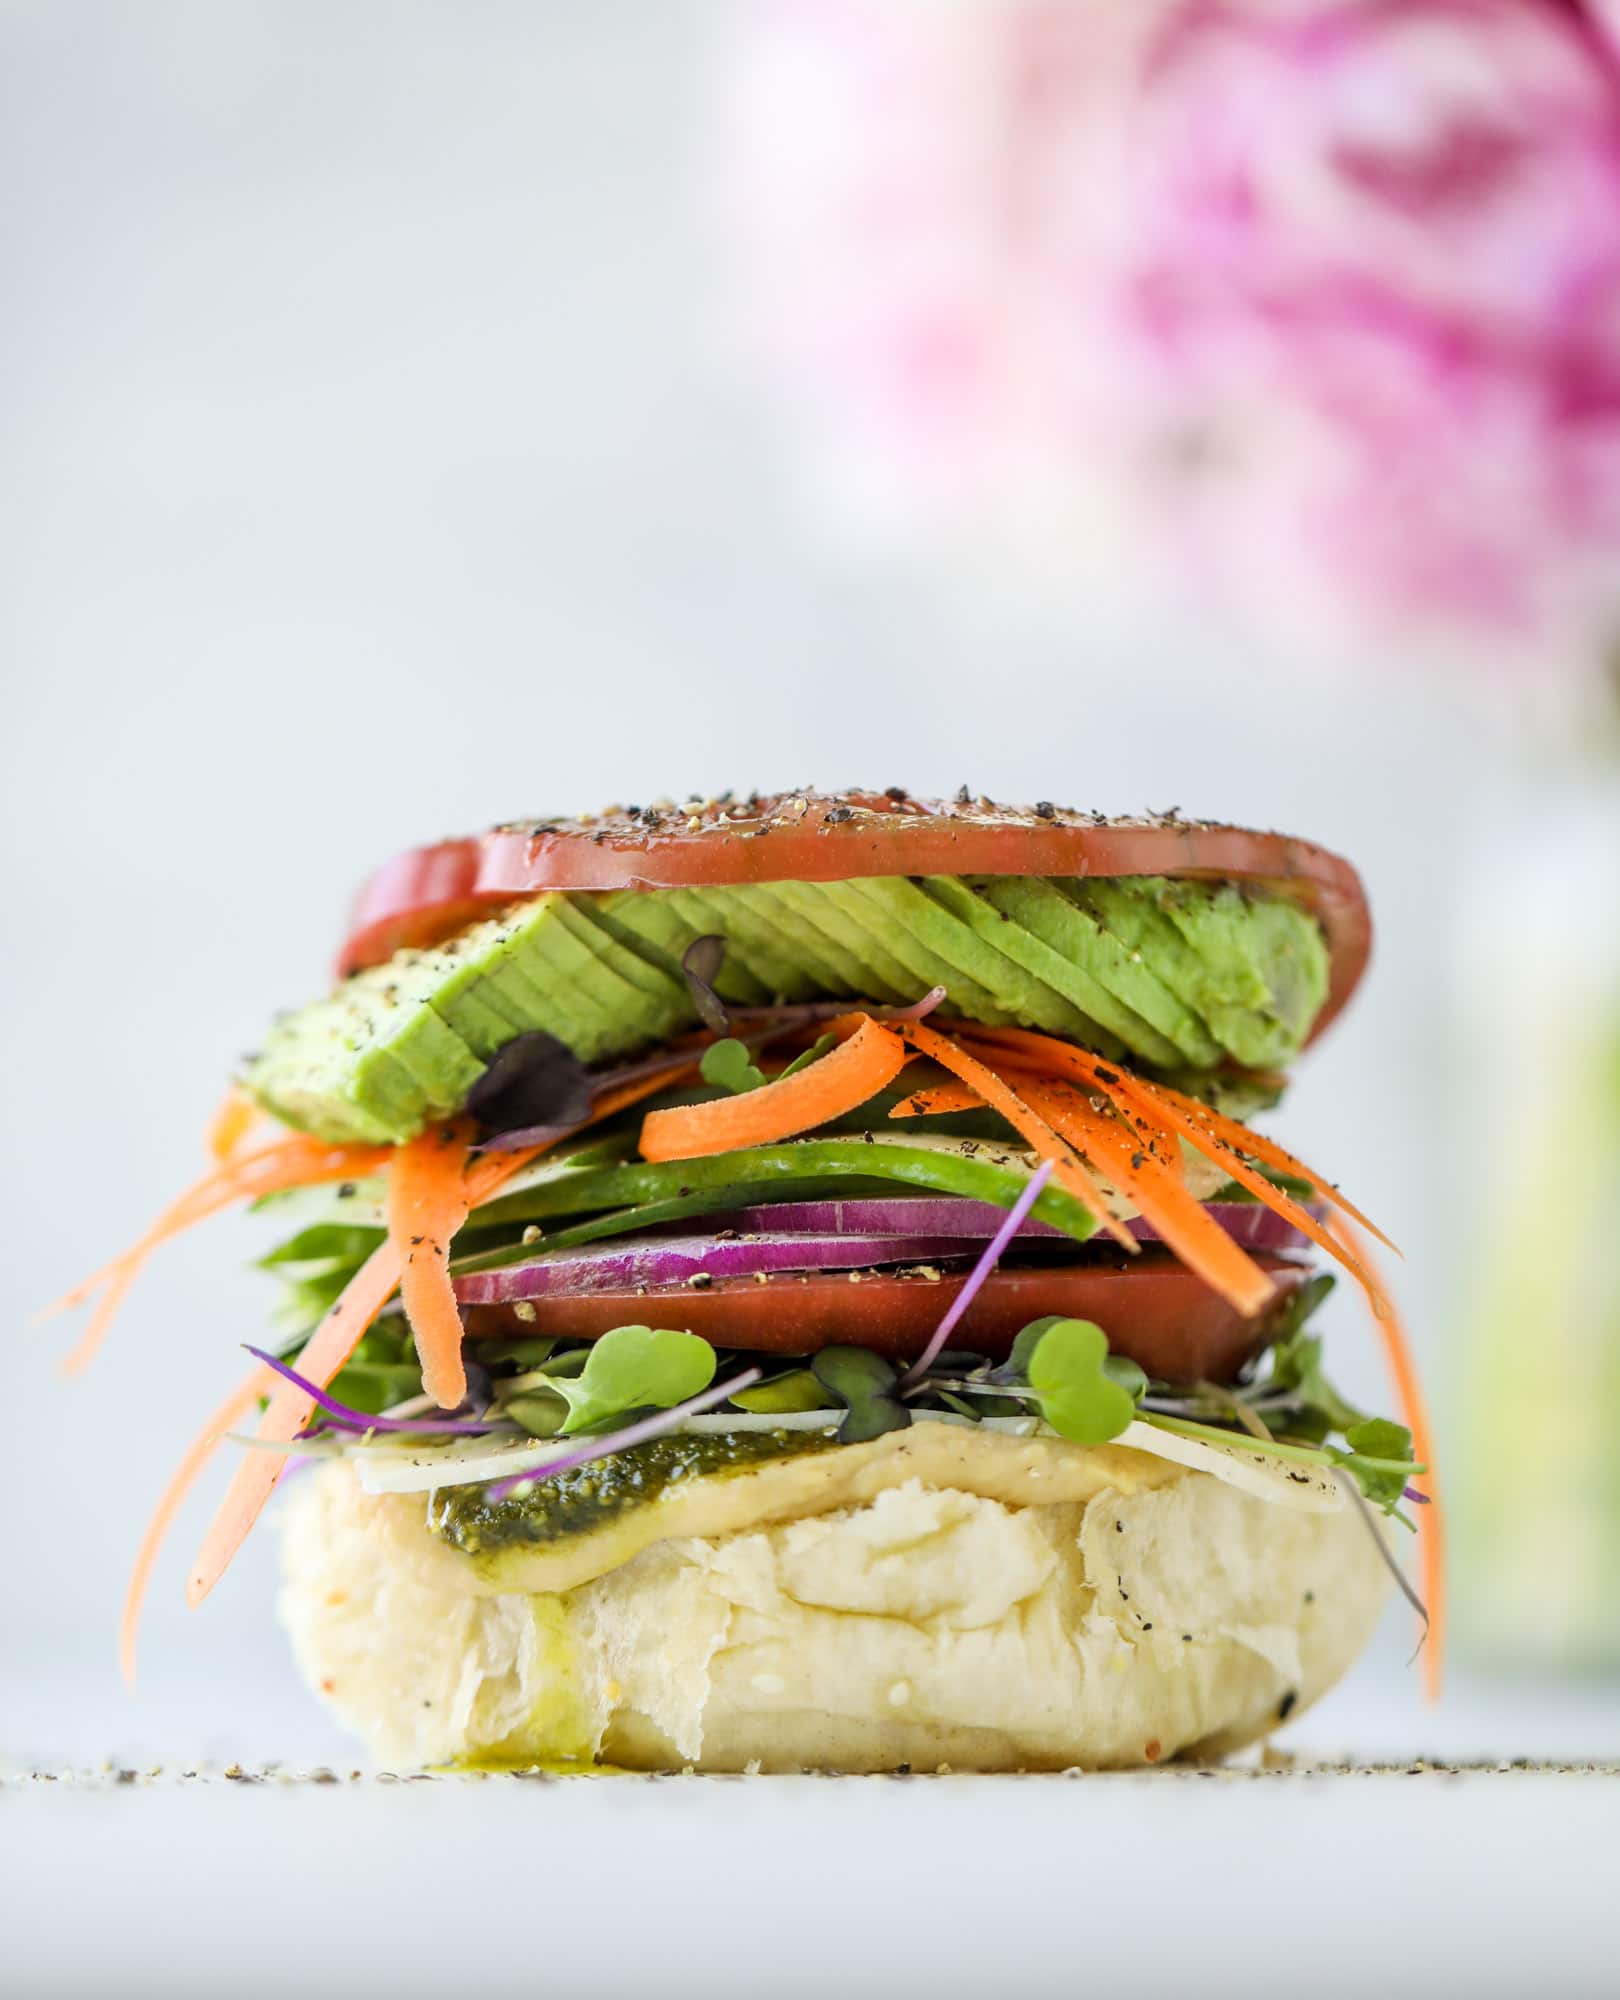 This summer veggie sandwich is full of creamy hummus, fresh pesto and havarti cheese along with tons of sliced, fresh vegetables. Best lunch ever!